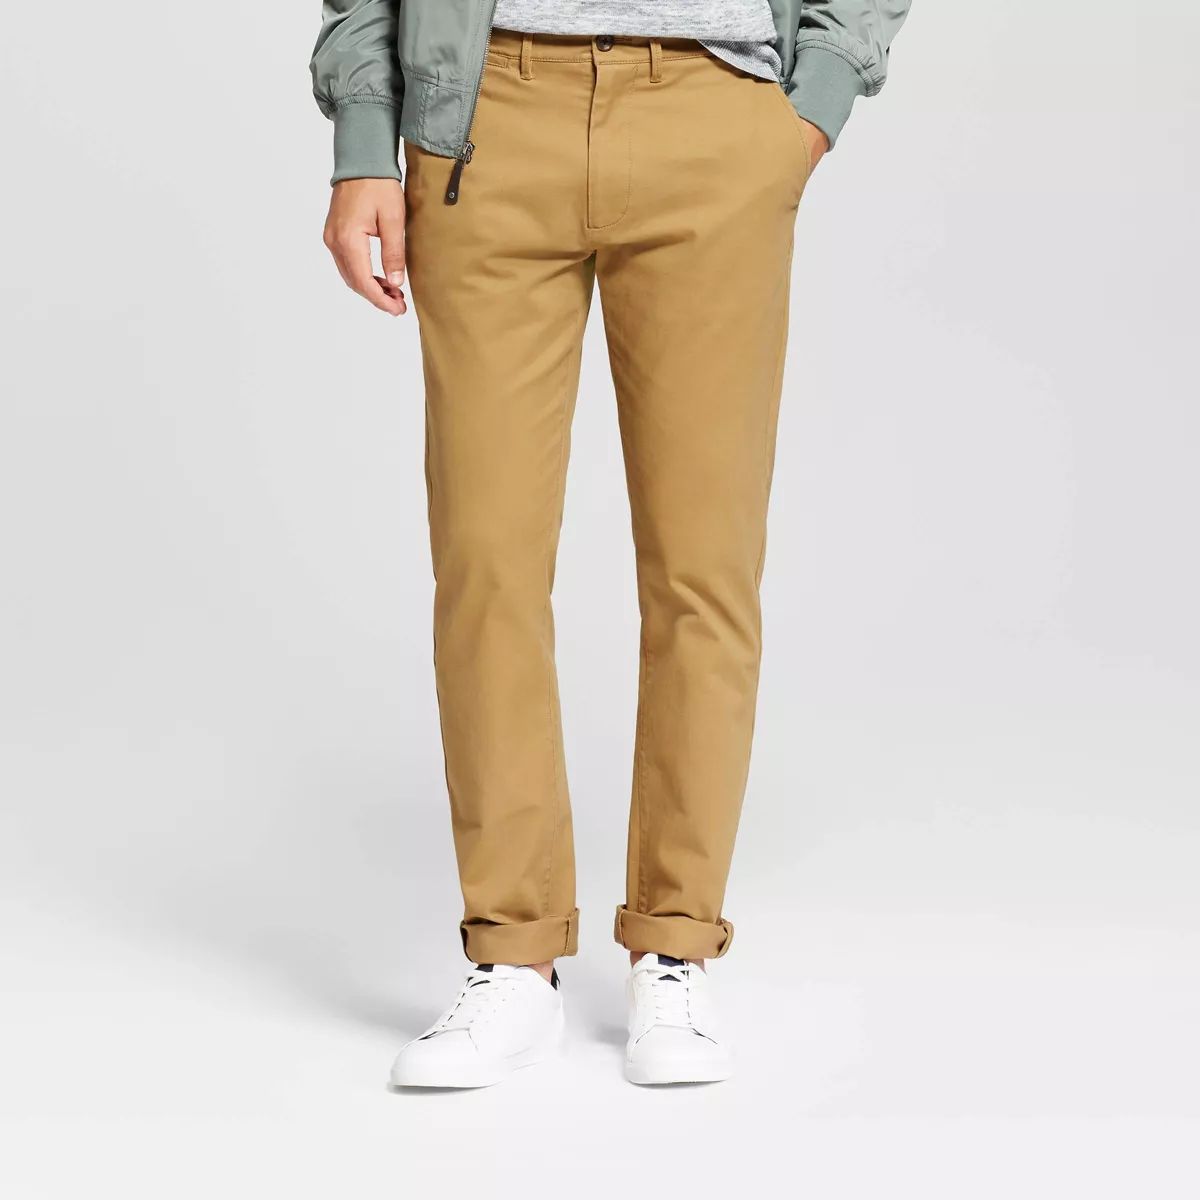 Men's Every Wear Slim Fit Chino Pants - Goodfellow & Co™ | Target